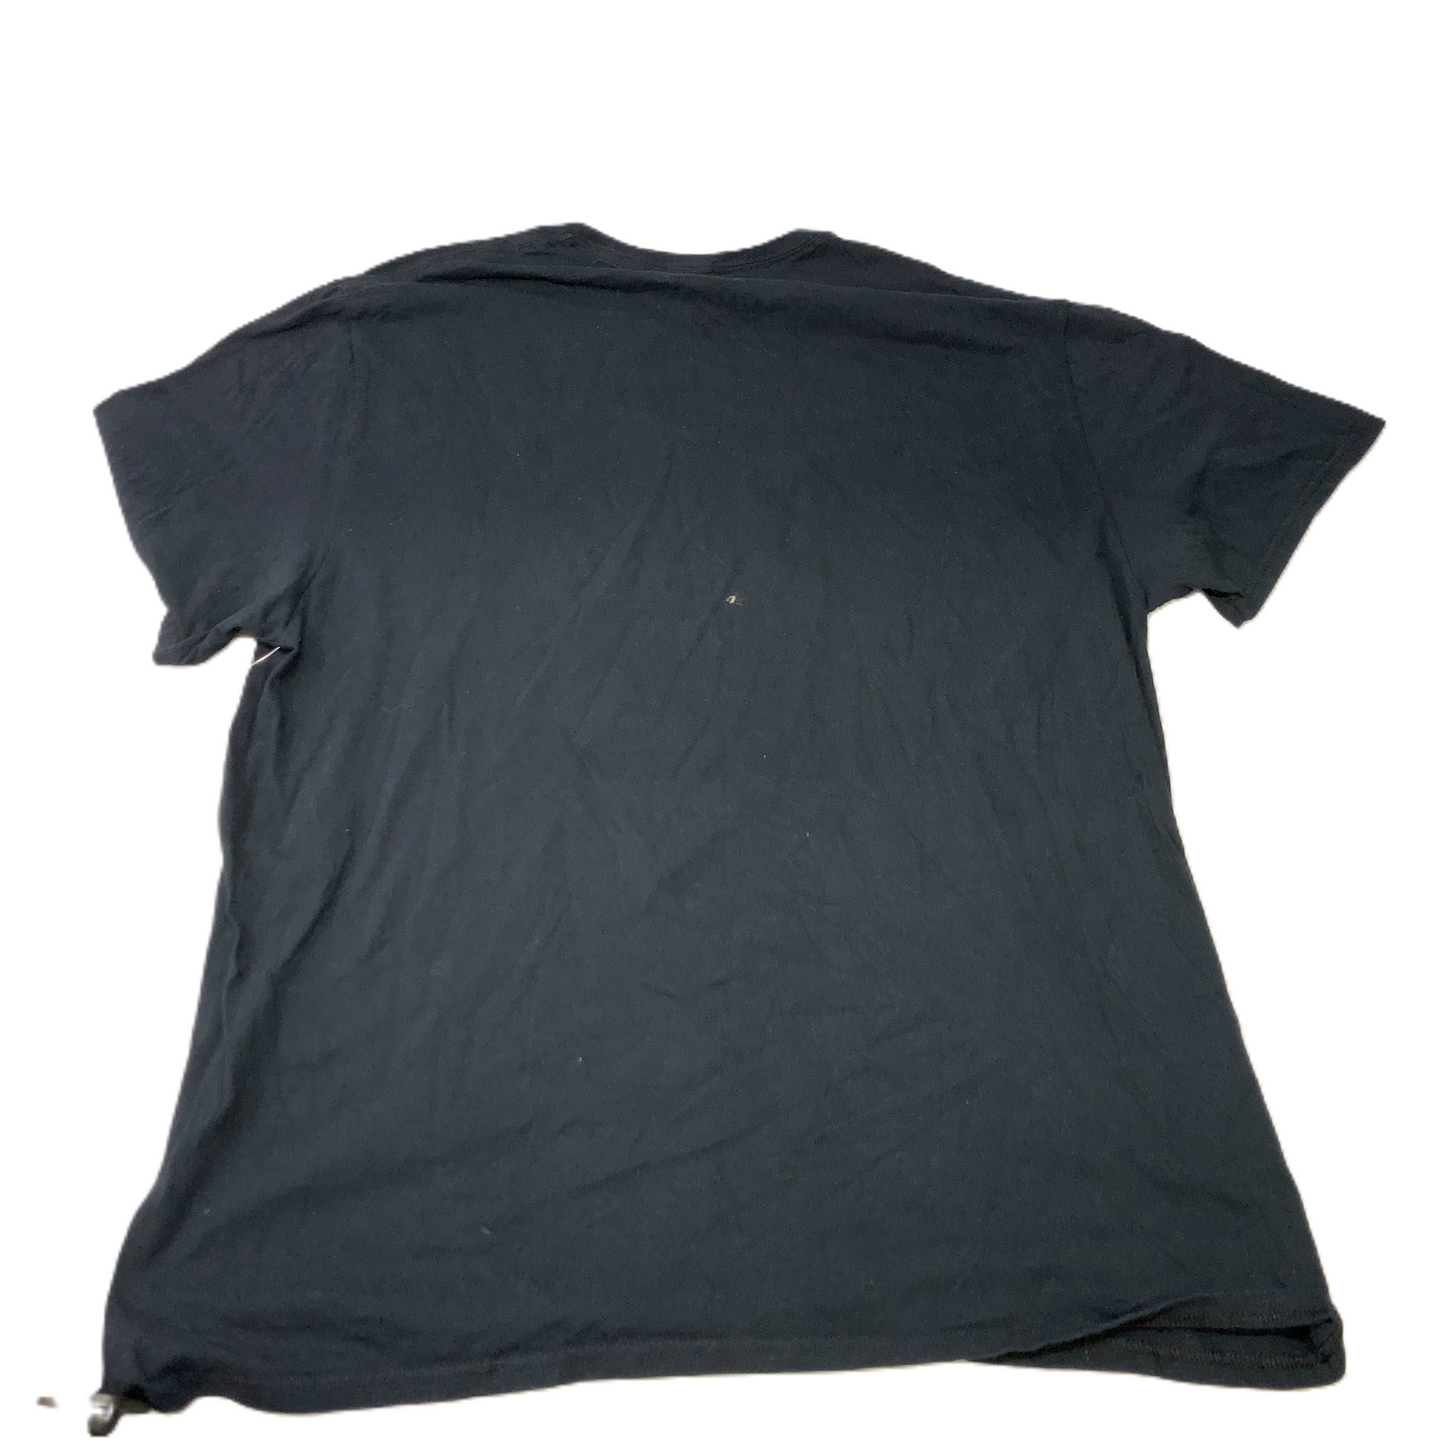 Black  Top Short Sleeve By Clothes Mentor  Size: 2x